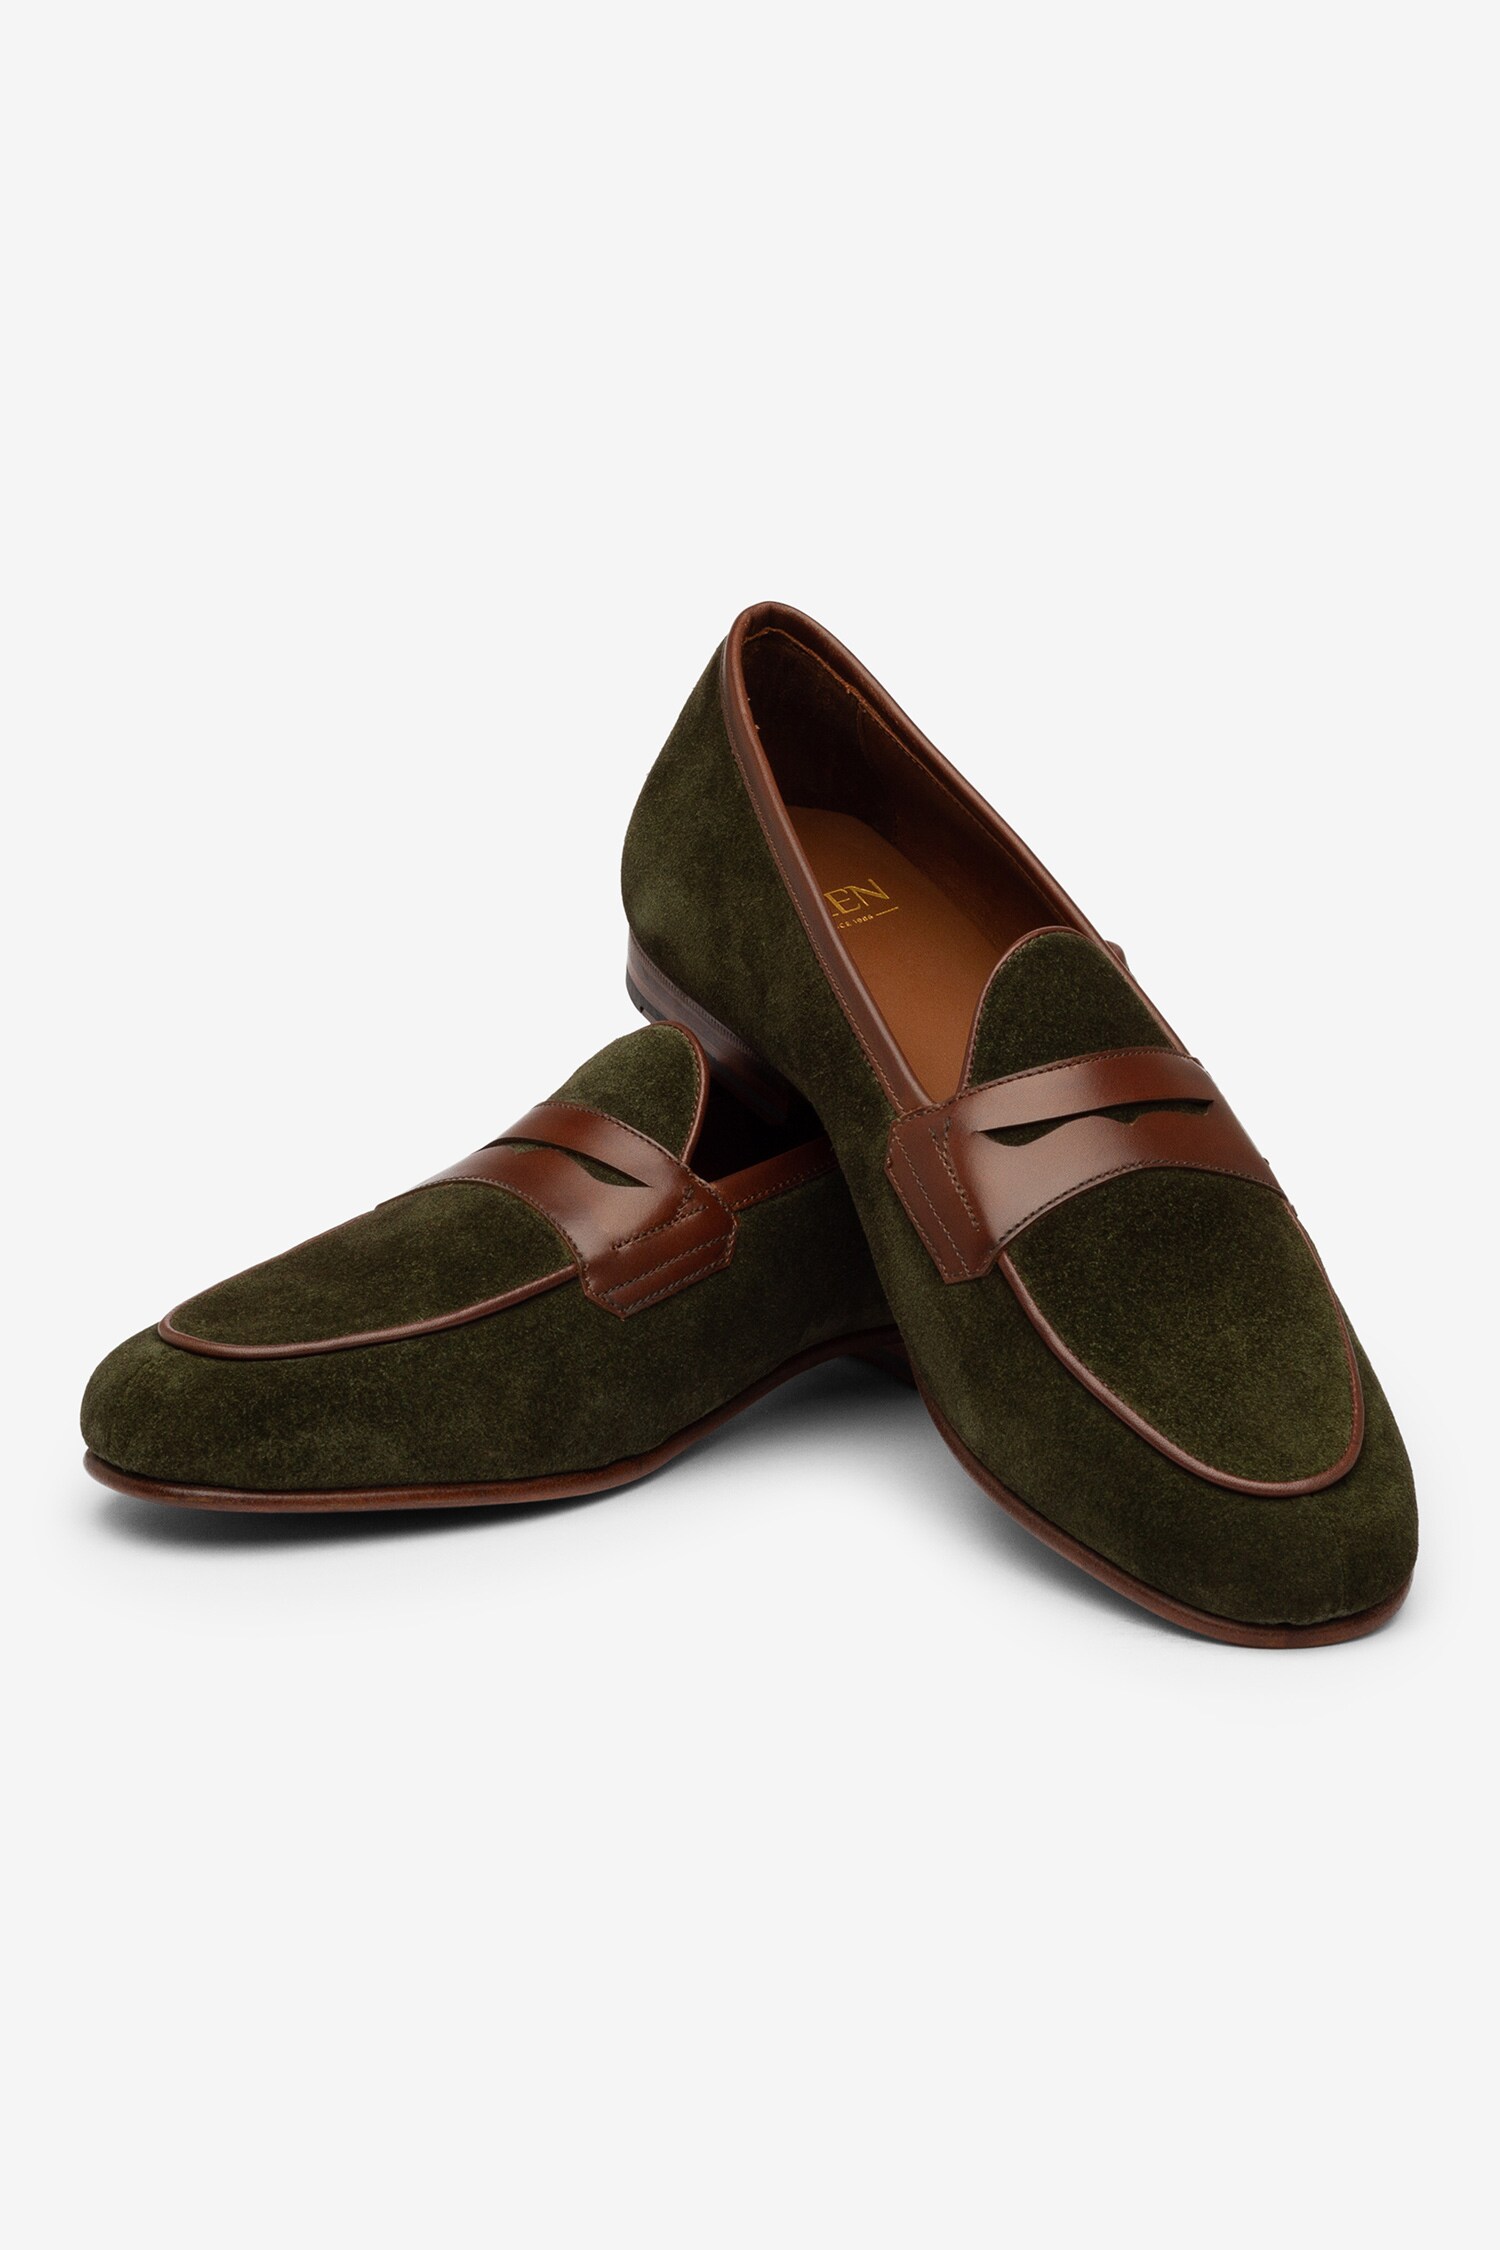 army green loafers